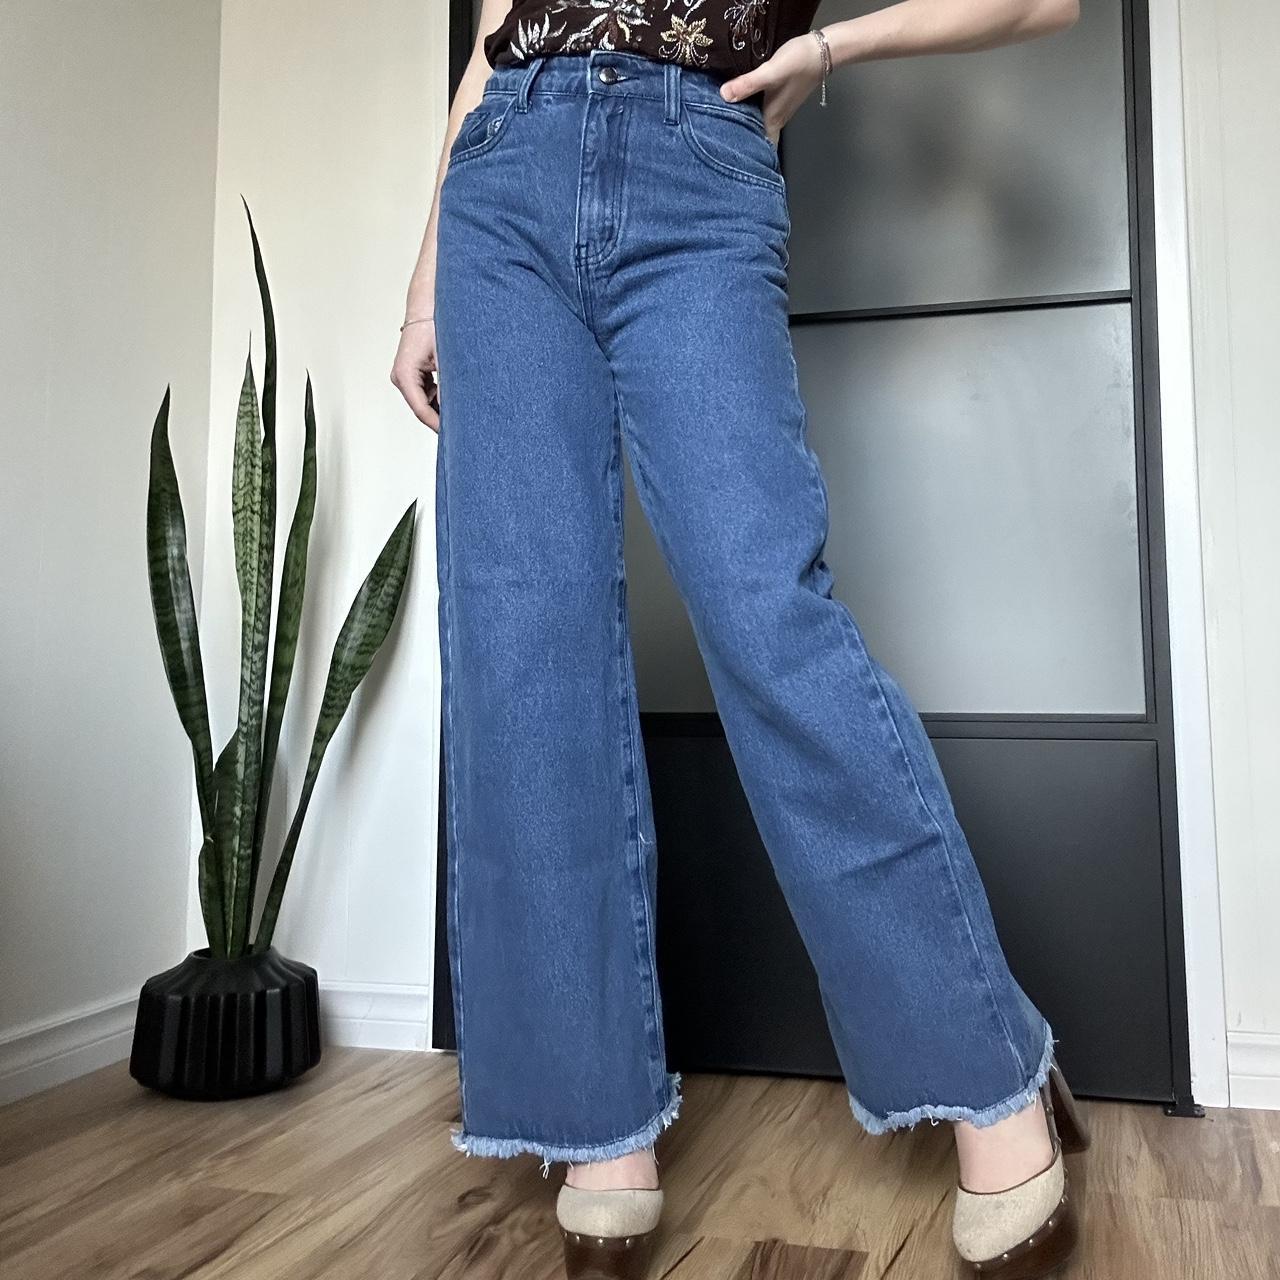 Women's Blue and Navy Jeans | Depop